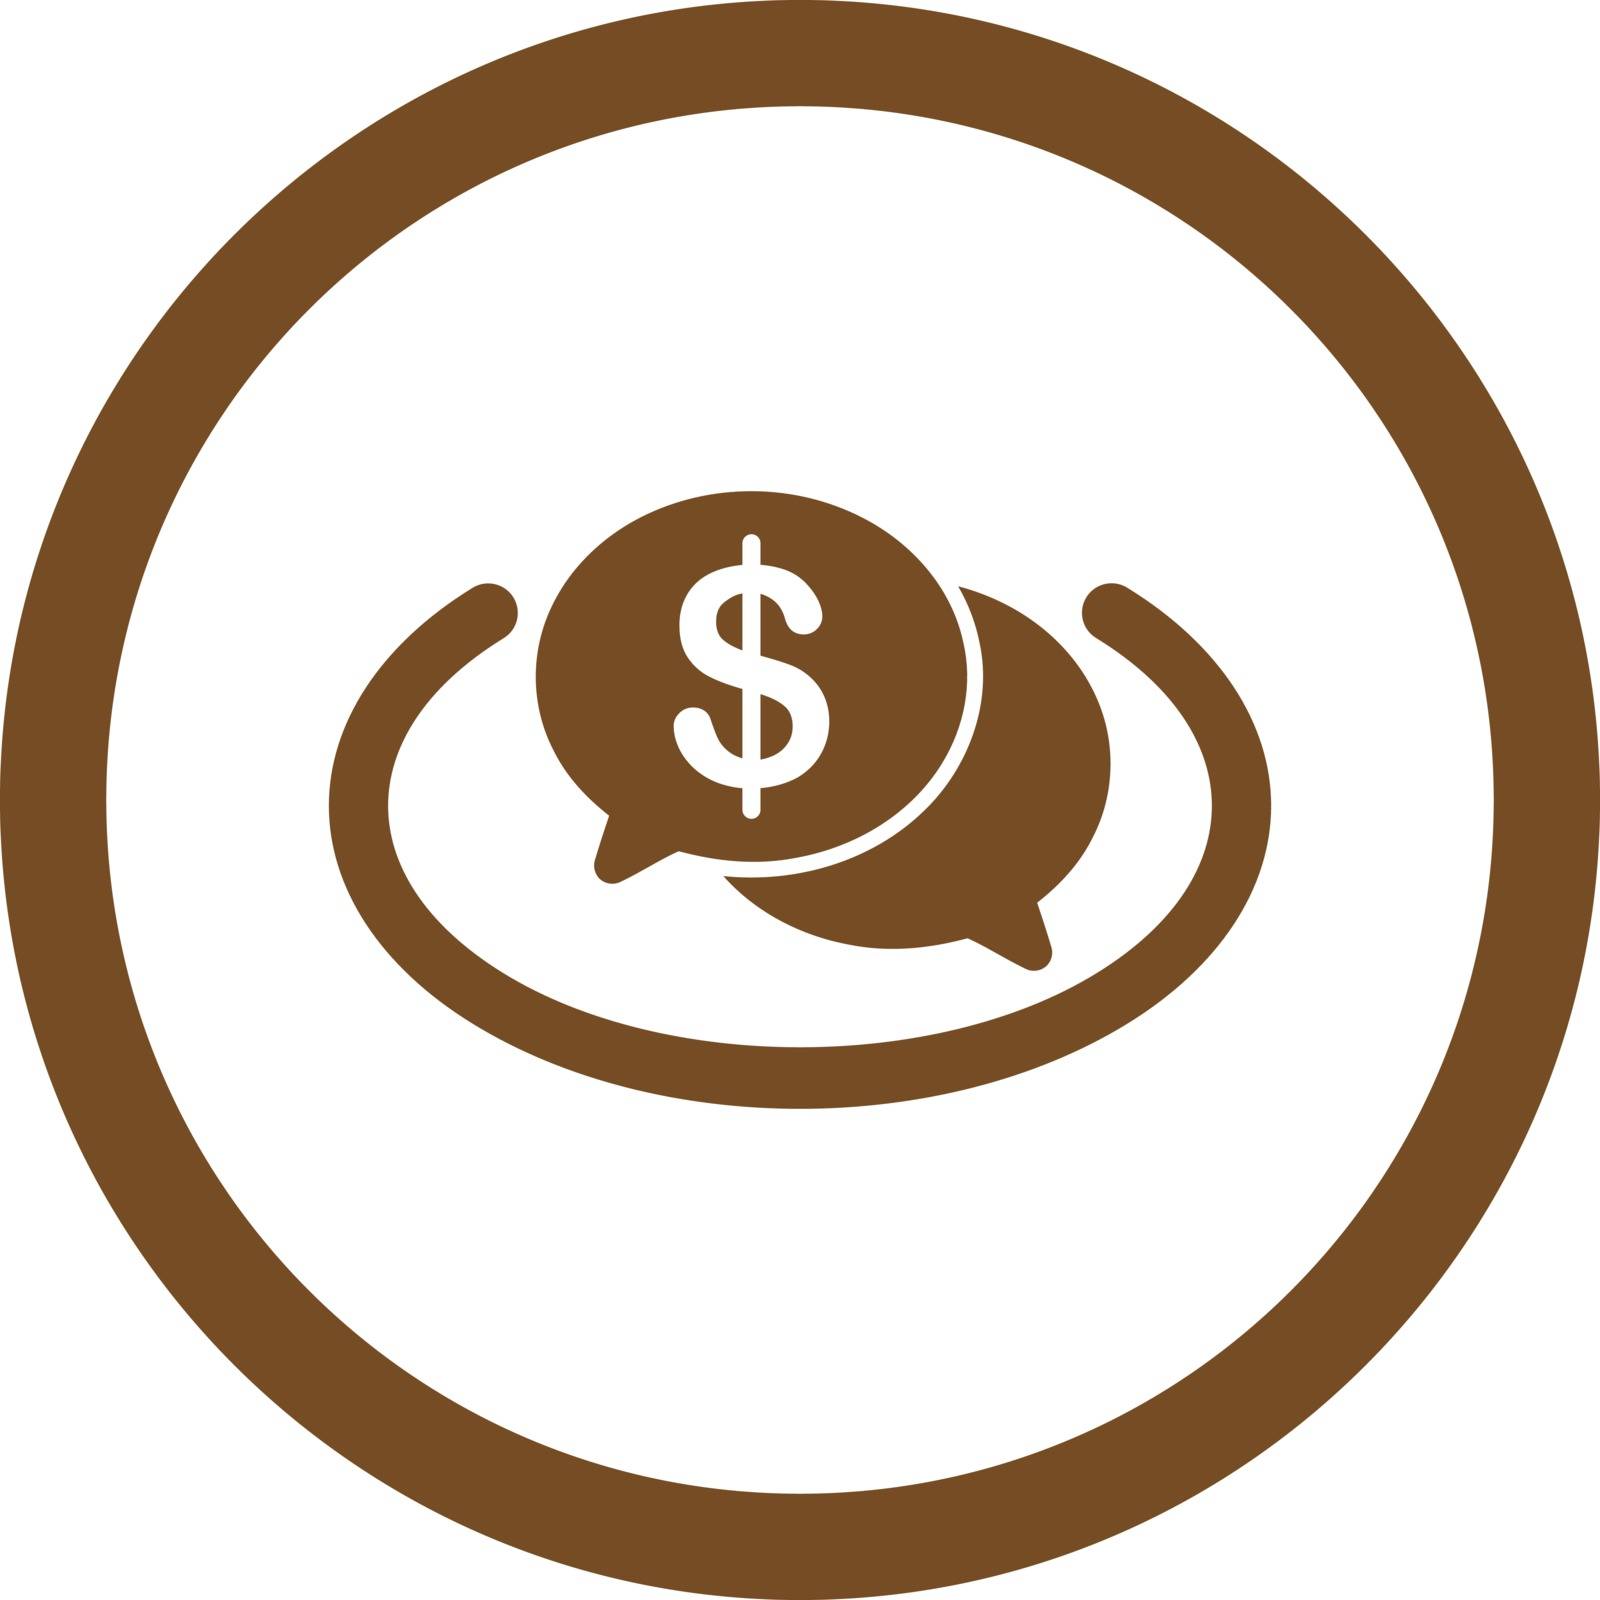 Financial Network vector icon. This flat rounded symbol uses brown color and isolated on a white background.